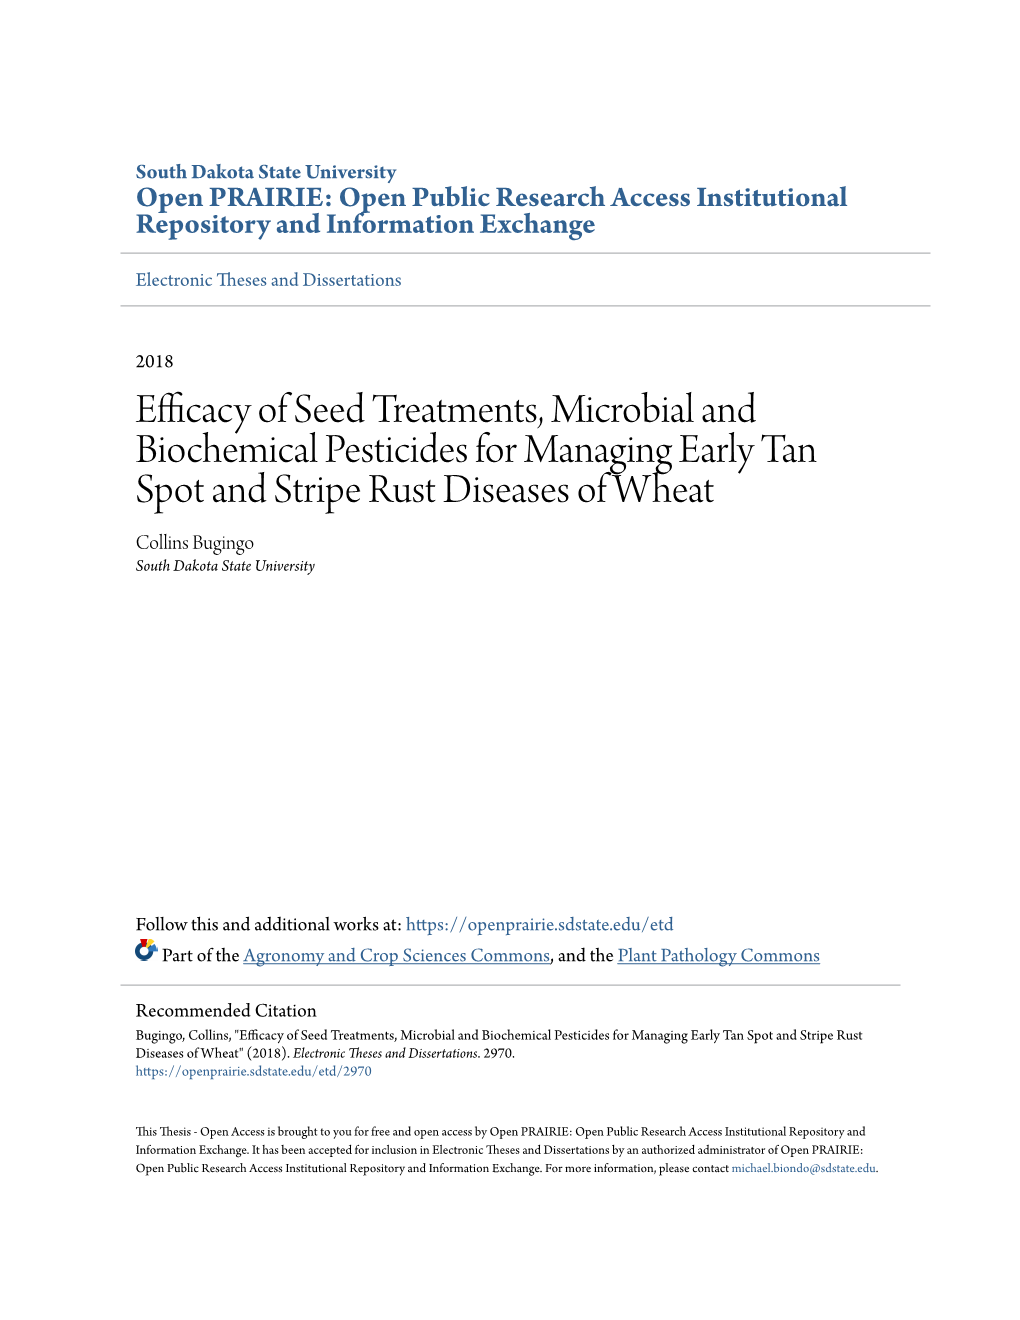 Efficacy of Seed Treatments, Microbial and Biochemical Pesticides for Managing Early Tan Spot and Stripe Rust Diseases of Wheat